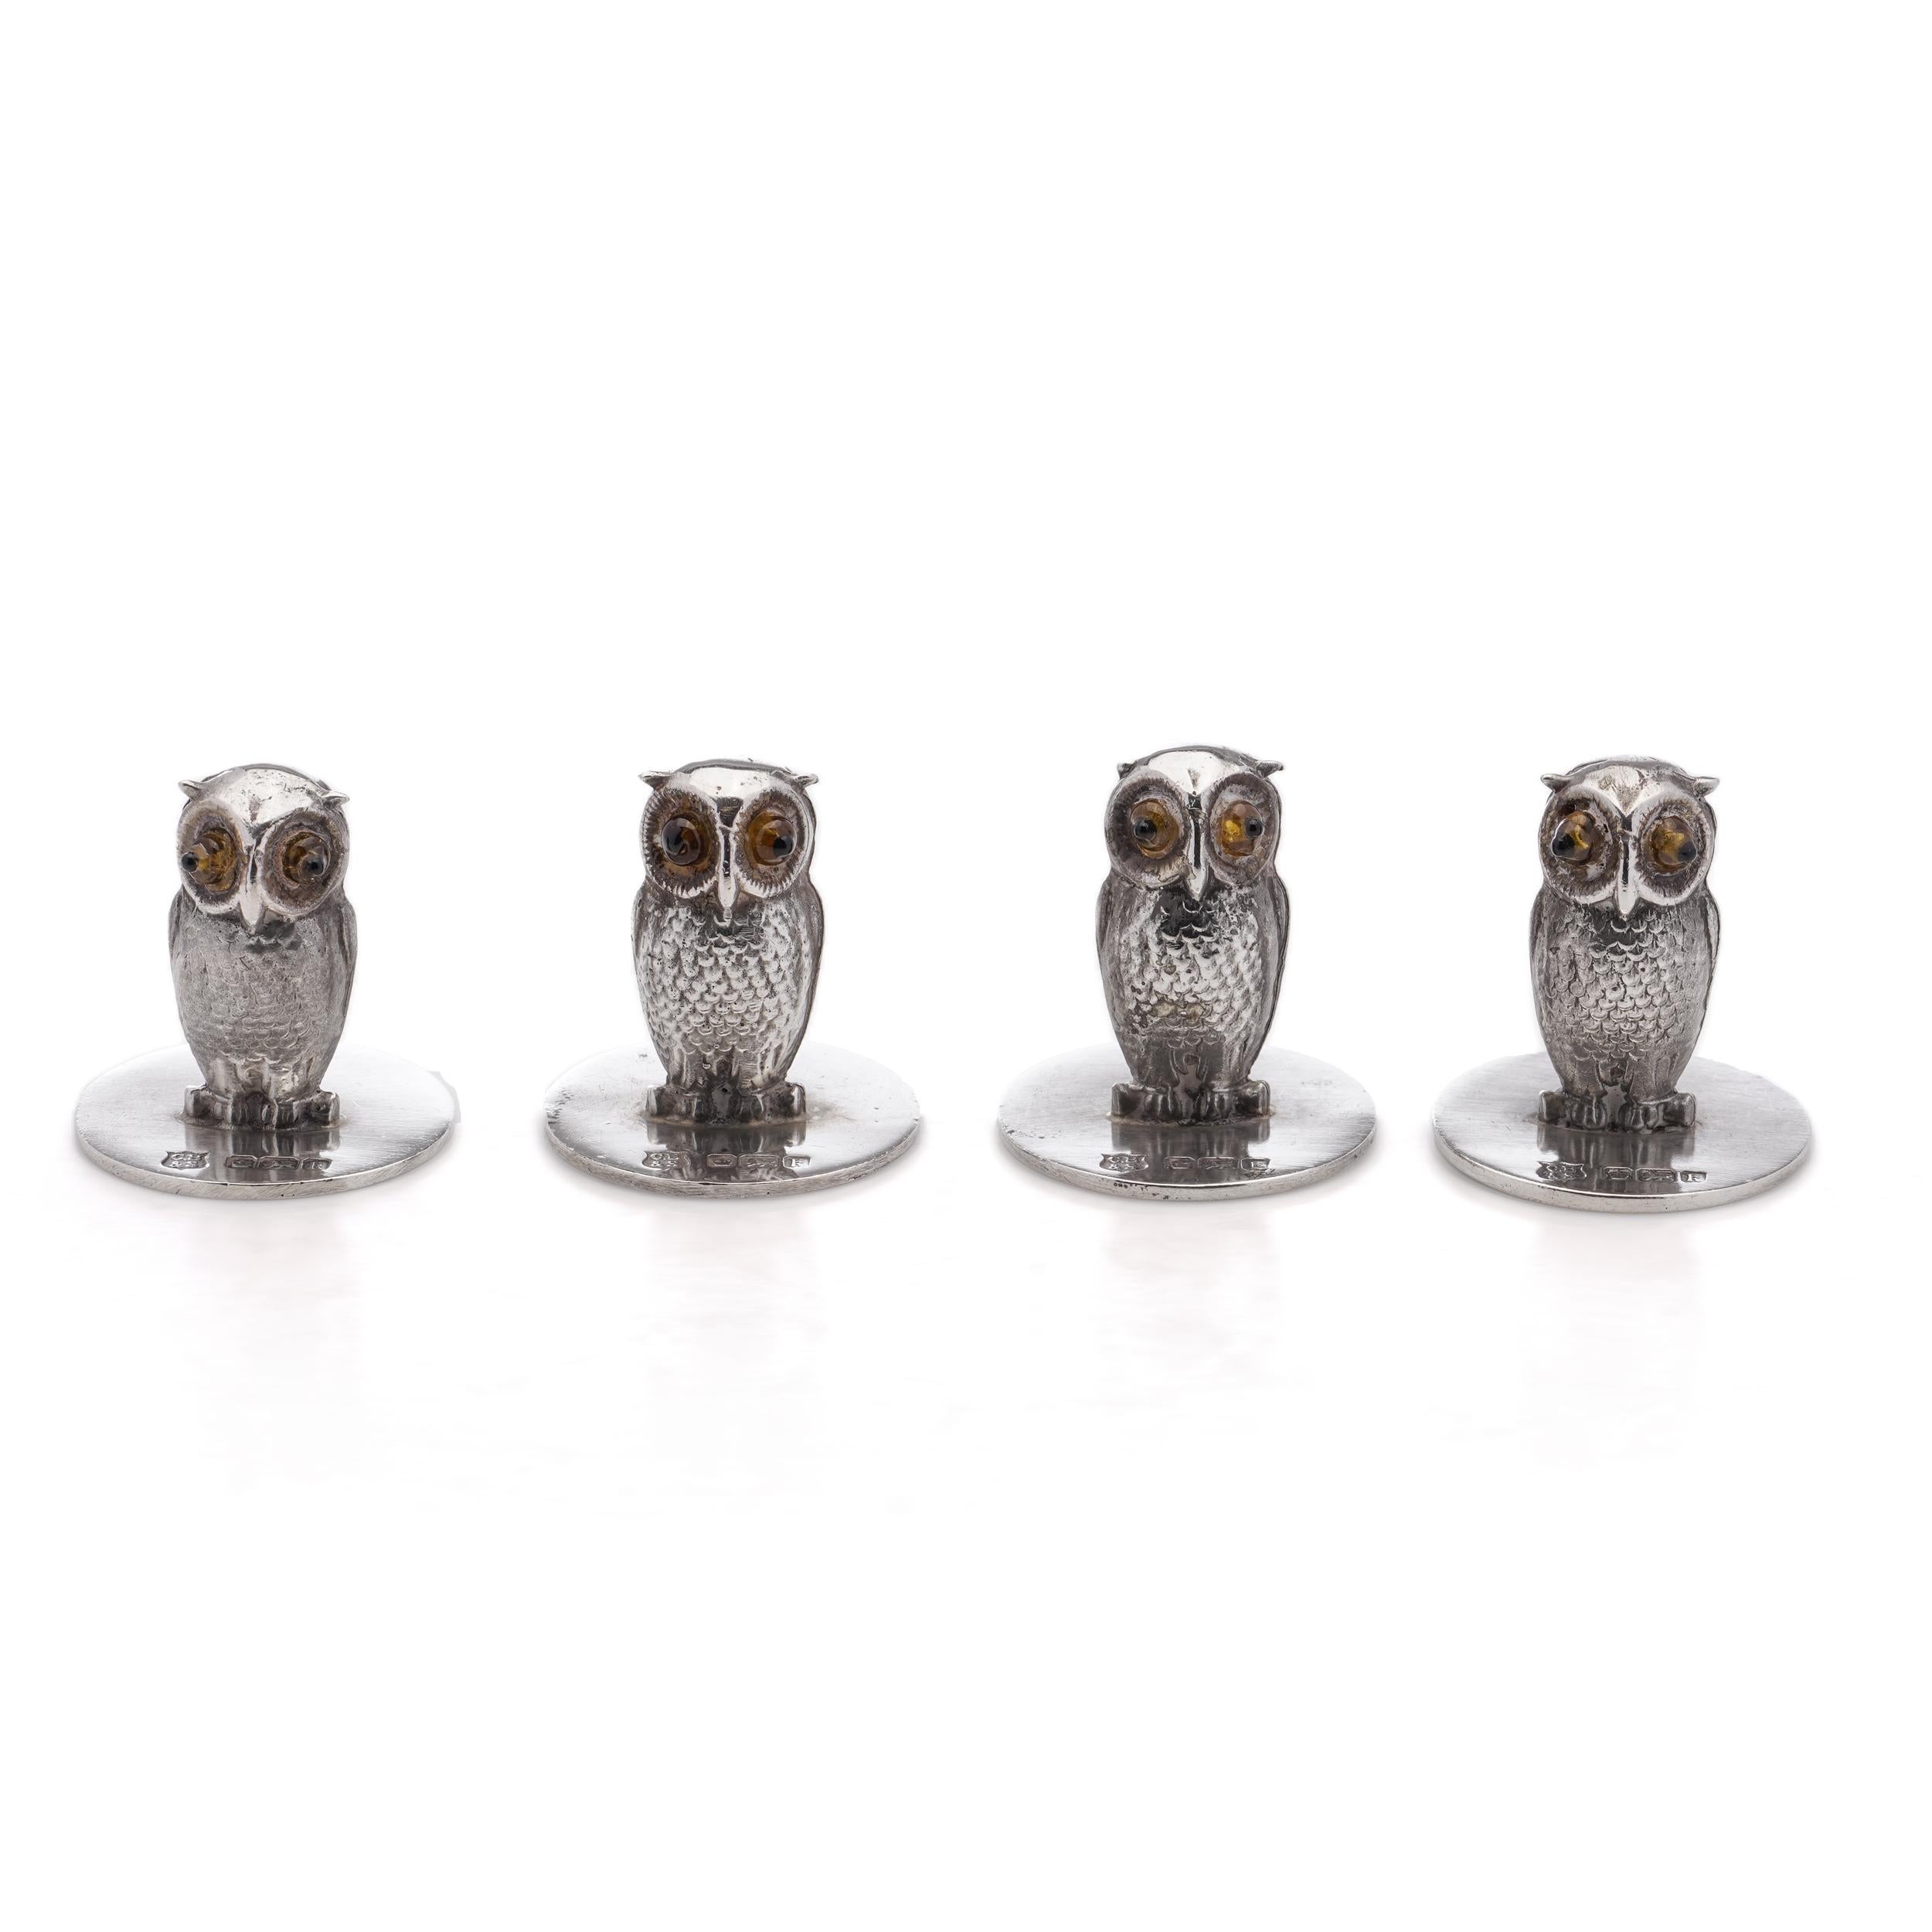 Cooper Brothers & Sons Ltd antique Edwardian sterling silver set of 4 owl-shaped place card holders.
Each card holder is modelled as a standing owl with glass eyes and mounted on a plain circular base. 

Made in the United Kingdom, Sheffield,